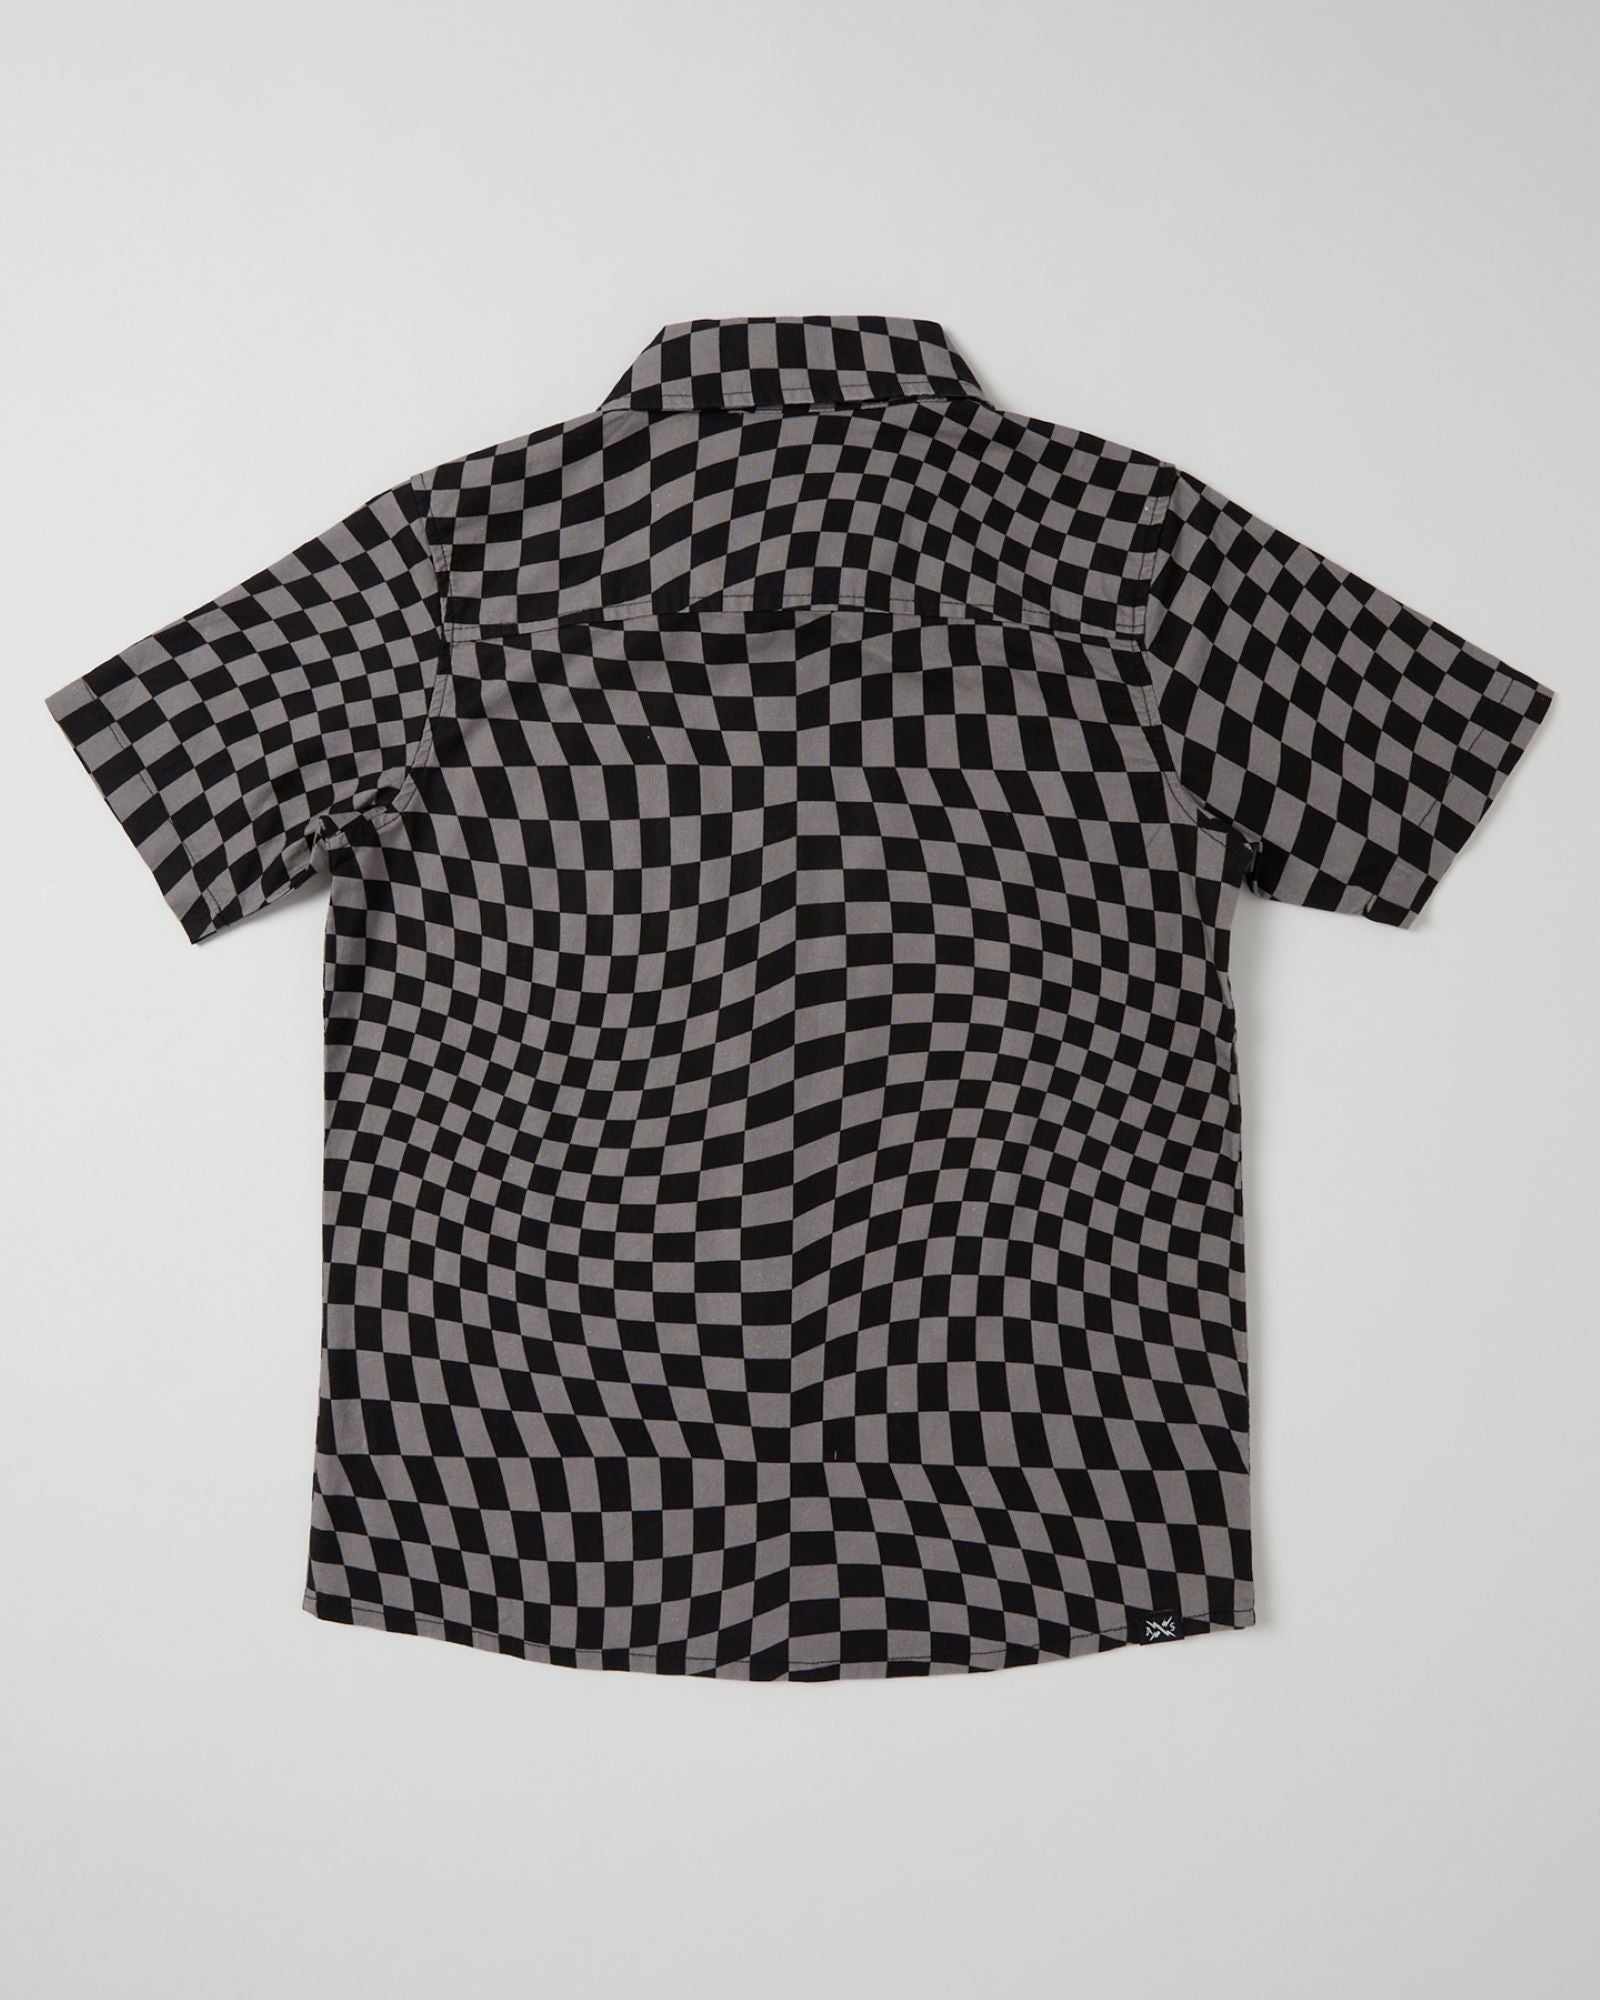 Alphabet Soup's Kids Warped Short Sleeve Shirt for boys aged 2 to 7. Crafted of 100% cotton with a vintage-washed finish, comfy classic fit, button-through placket, open chest pocket, and curved hemline—plus an extra-cool checkerboard pattern and woven clip label.